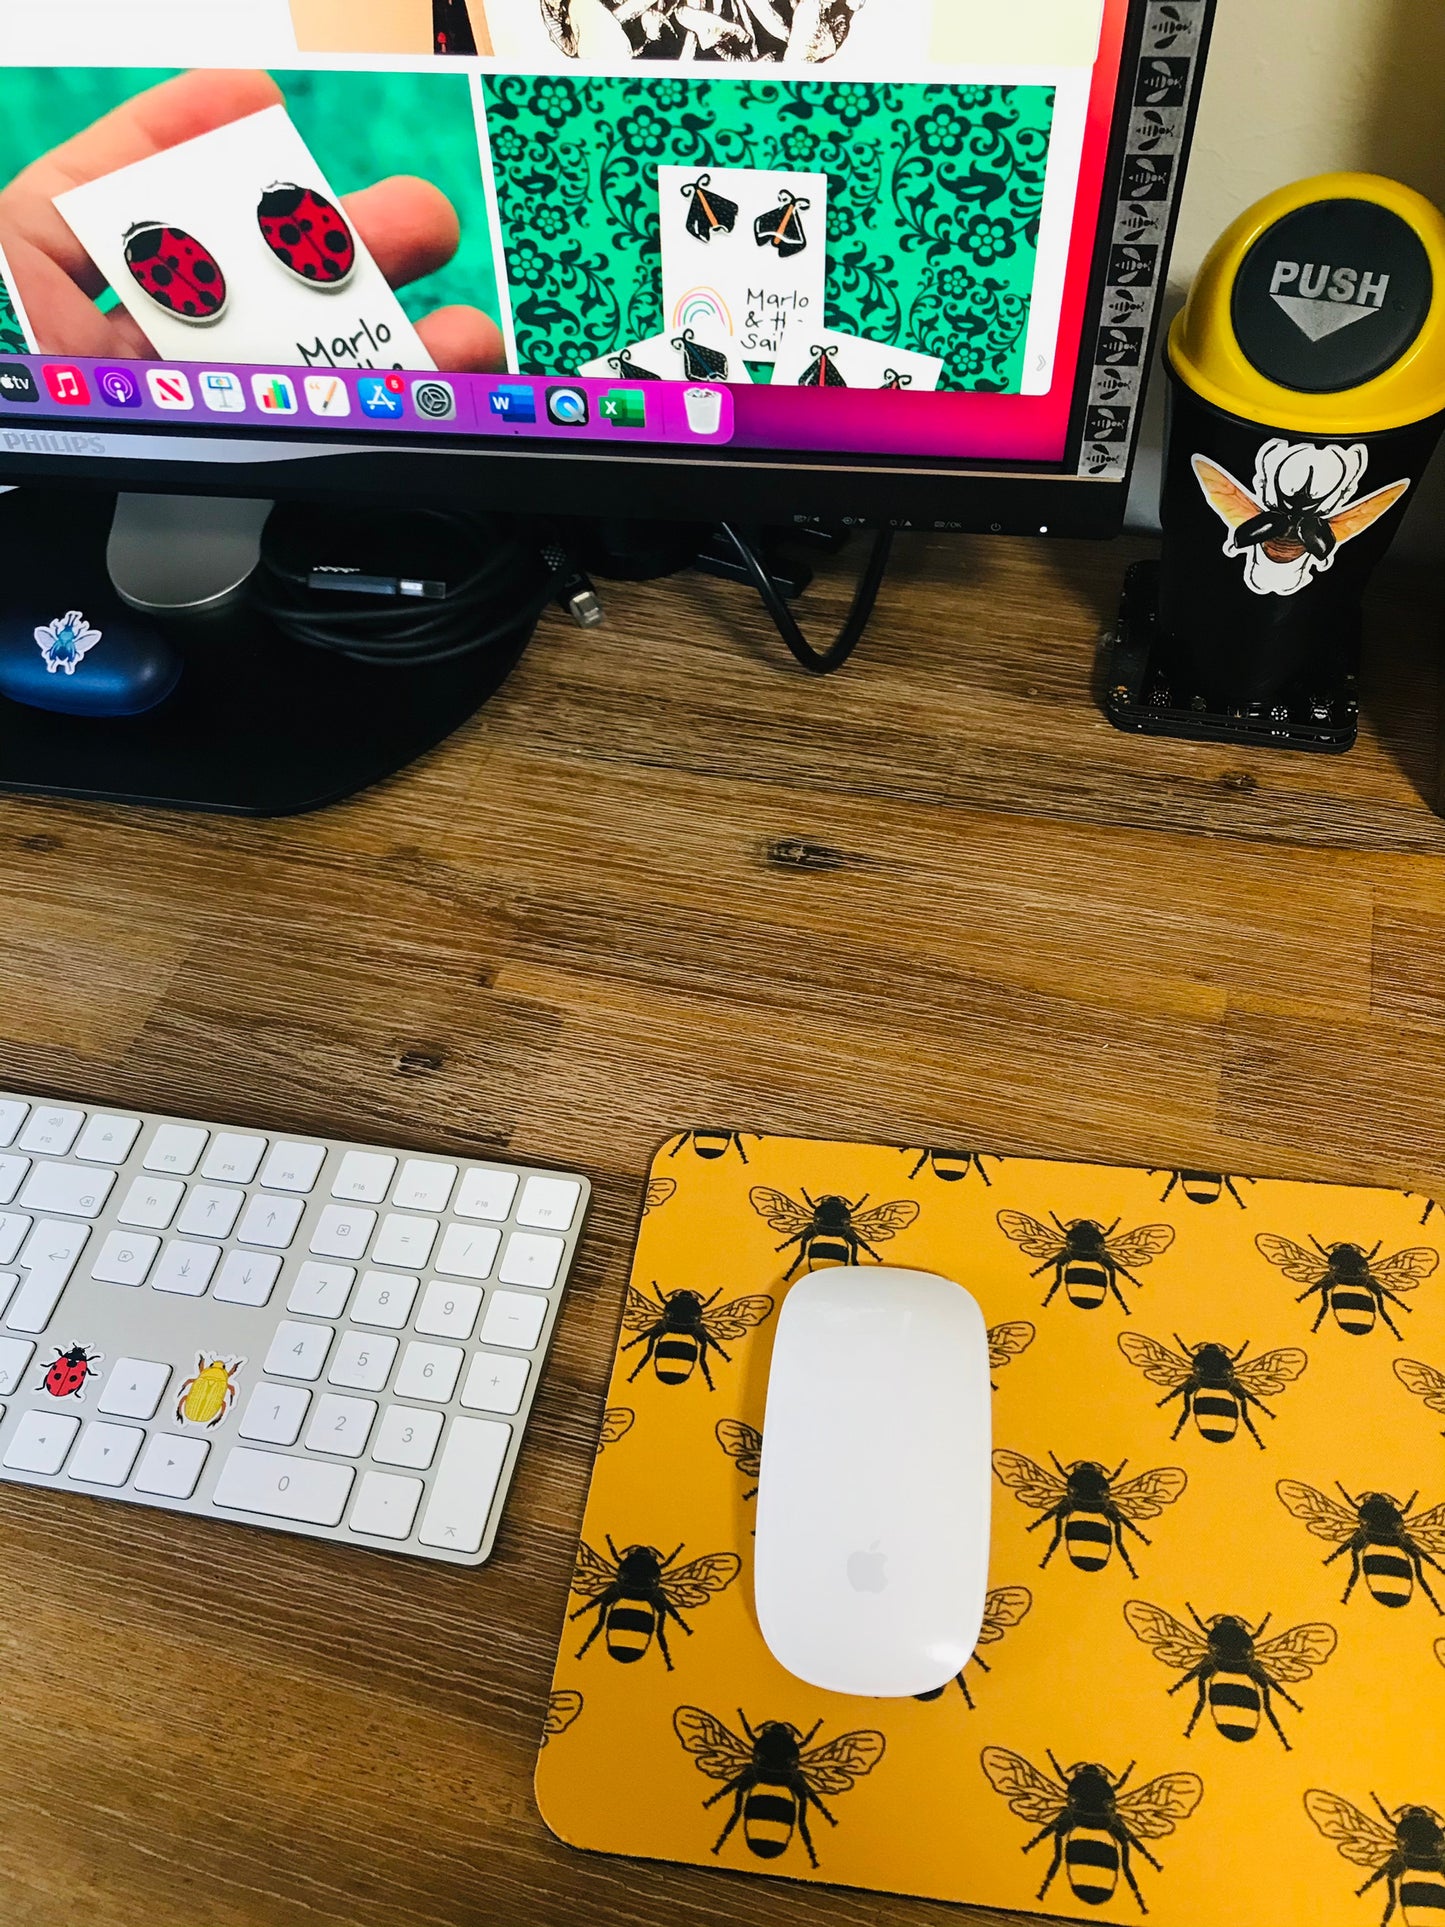 Bees Mouse Pad